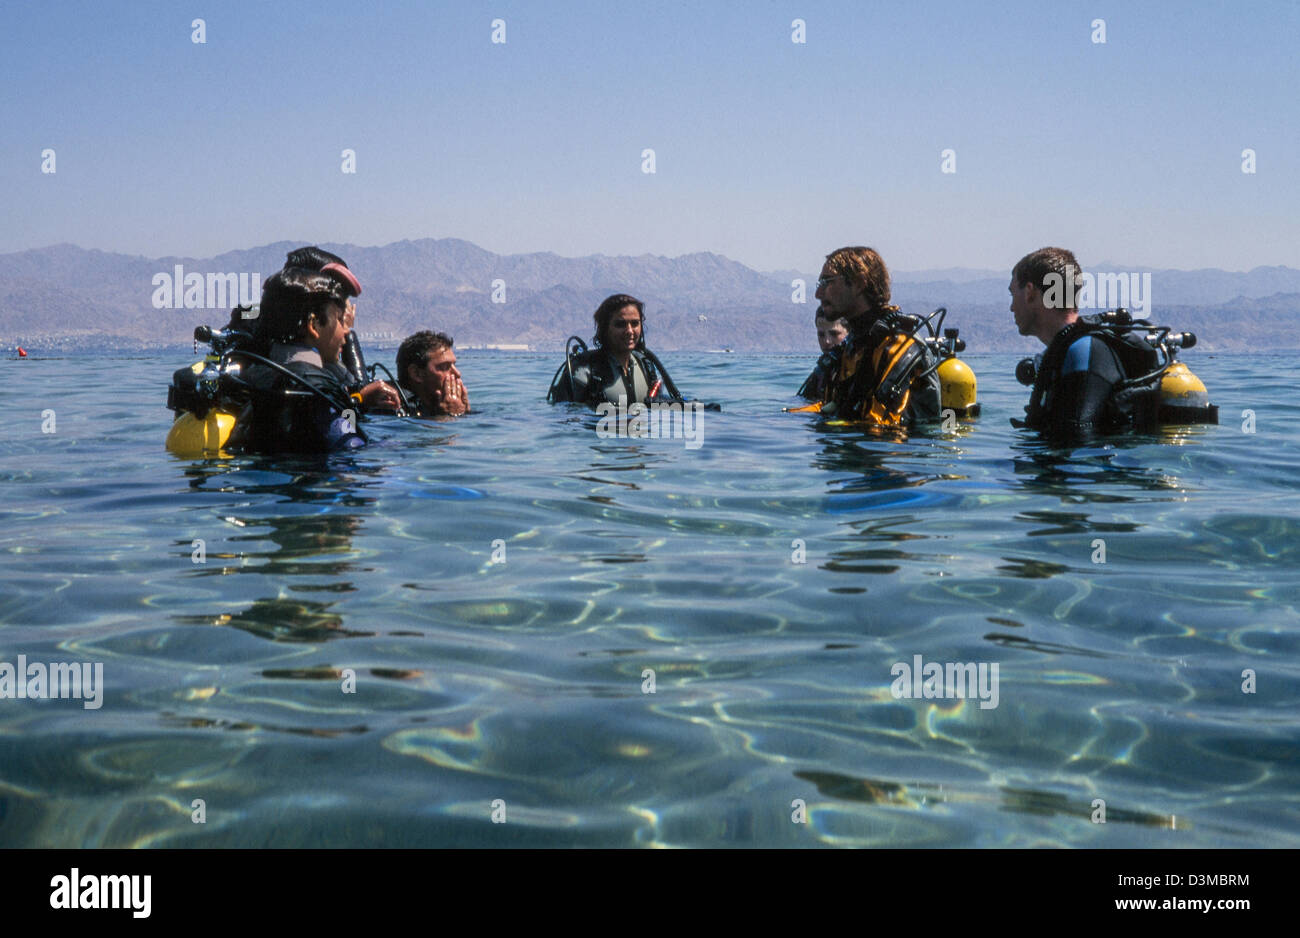 Beginners in diving instructed by the teacher. Stock Photo